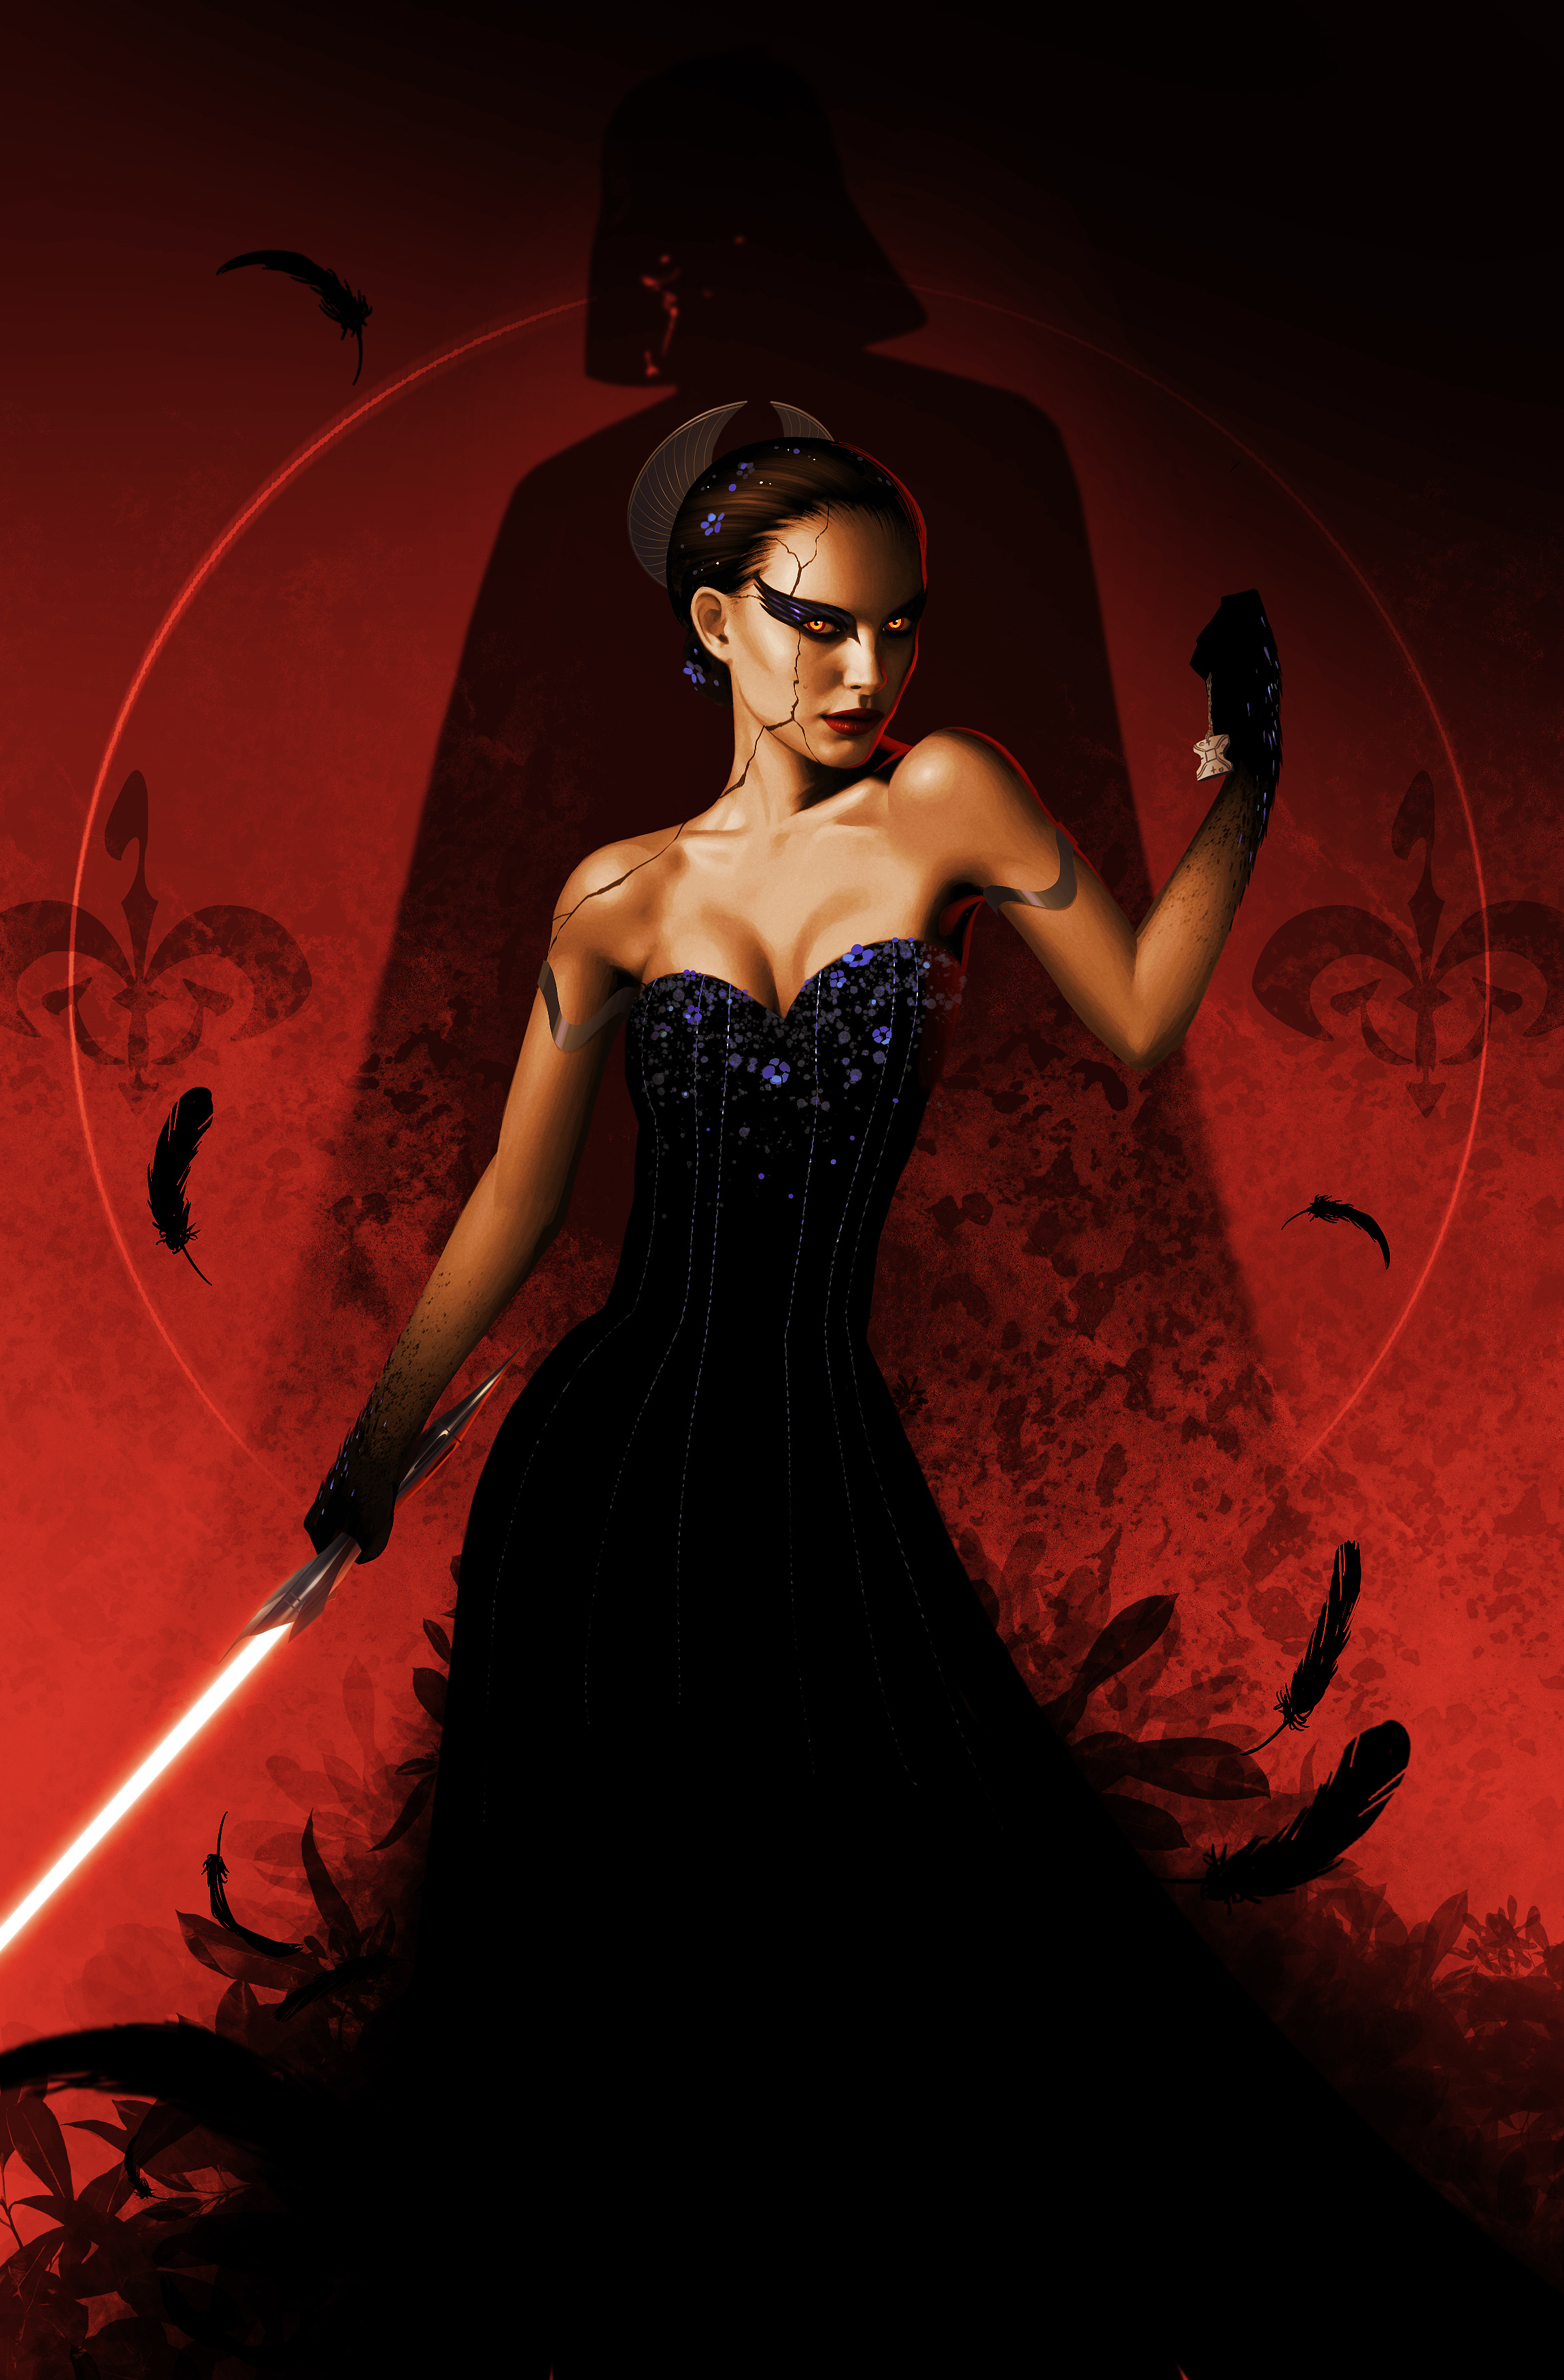 General 2300x3500 Star Wars Anakin Skywalker Padme Amidala Darth Vader Sith red background lightsaber red movies digital art clothes couple emperor cleavage